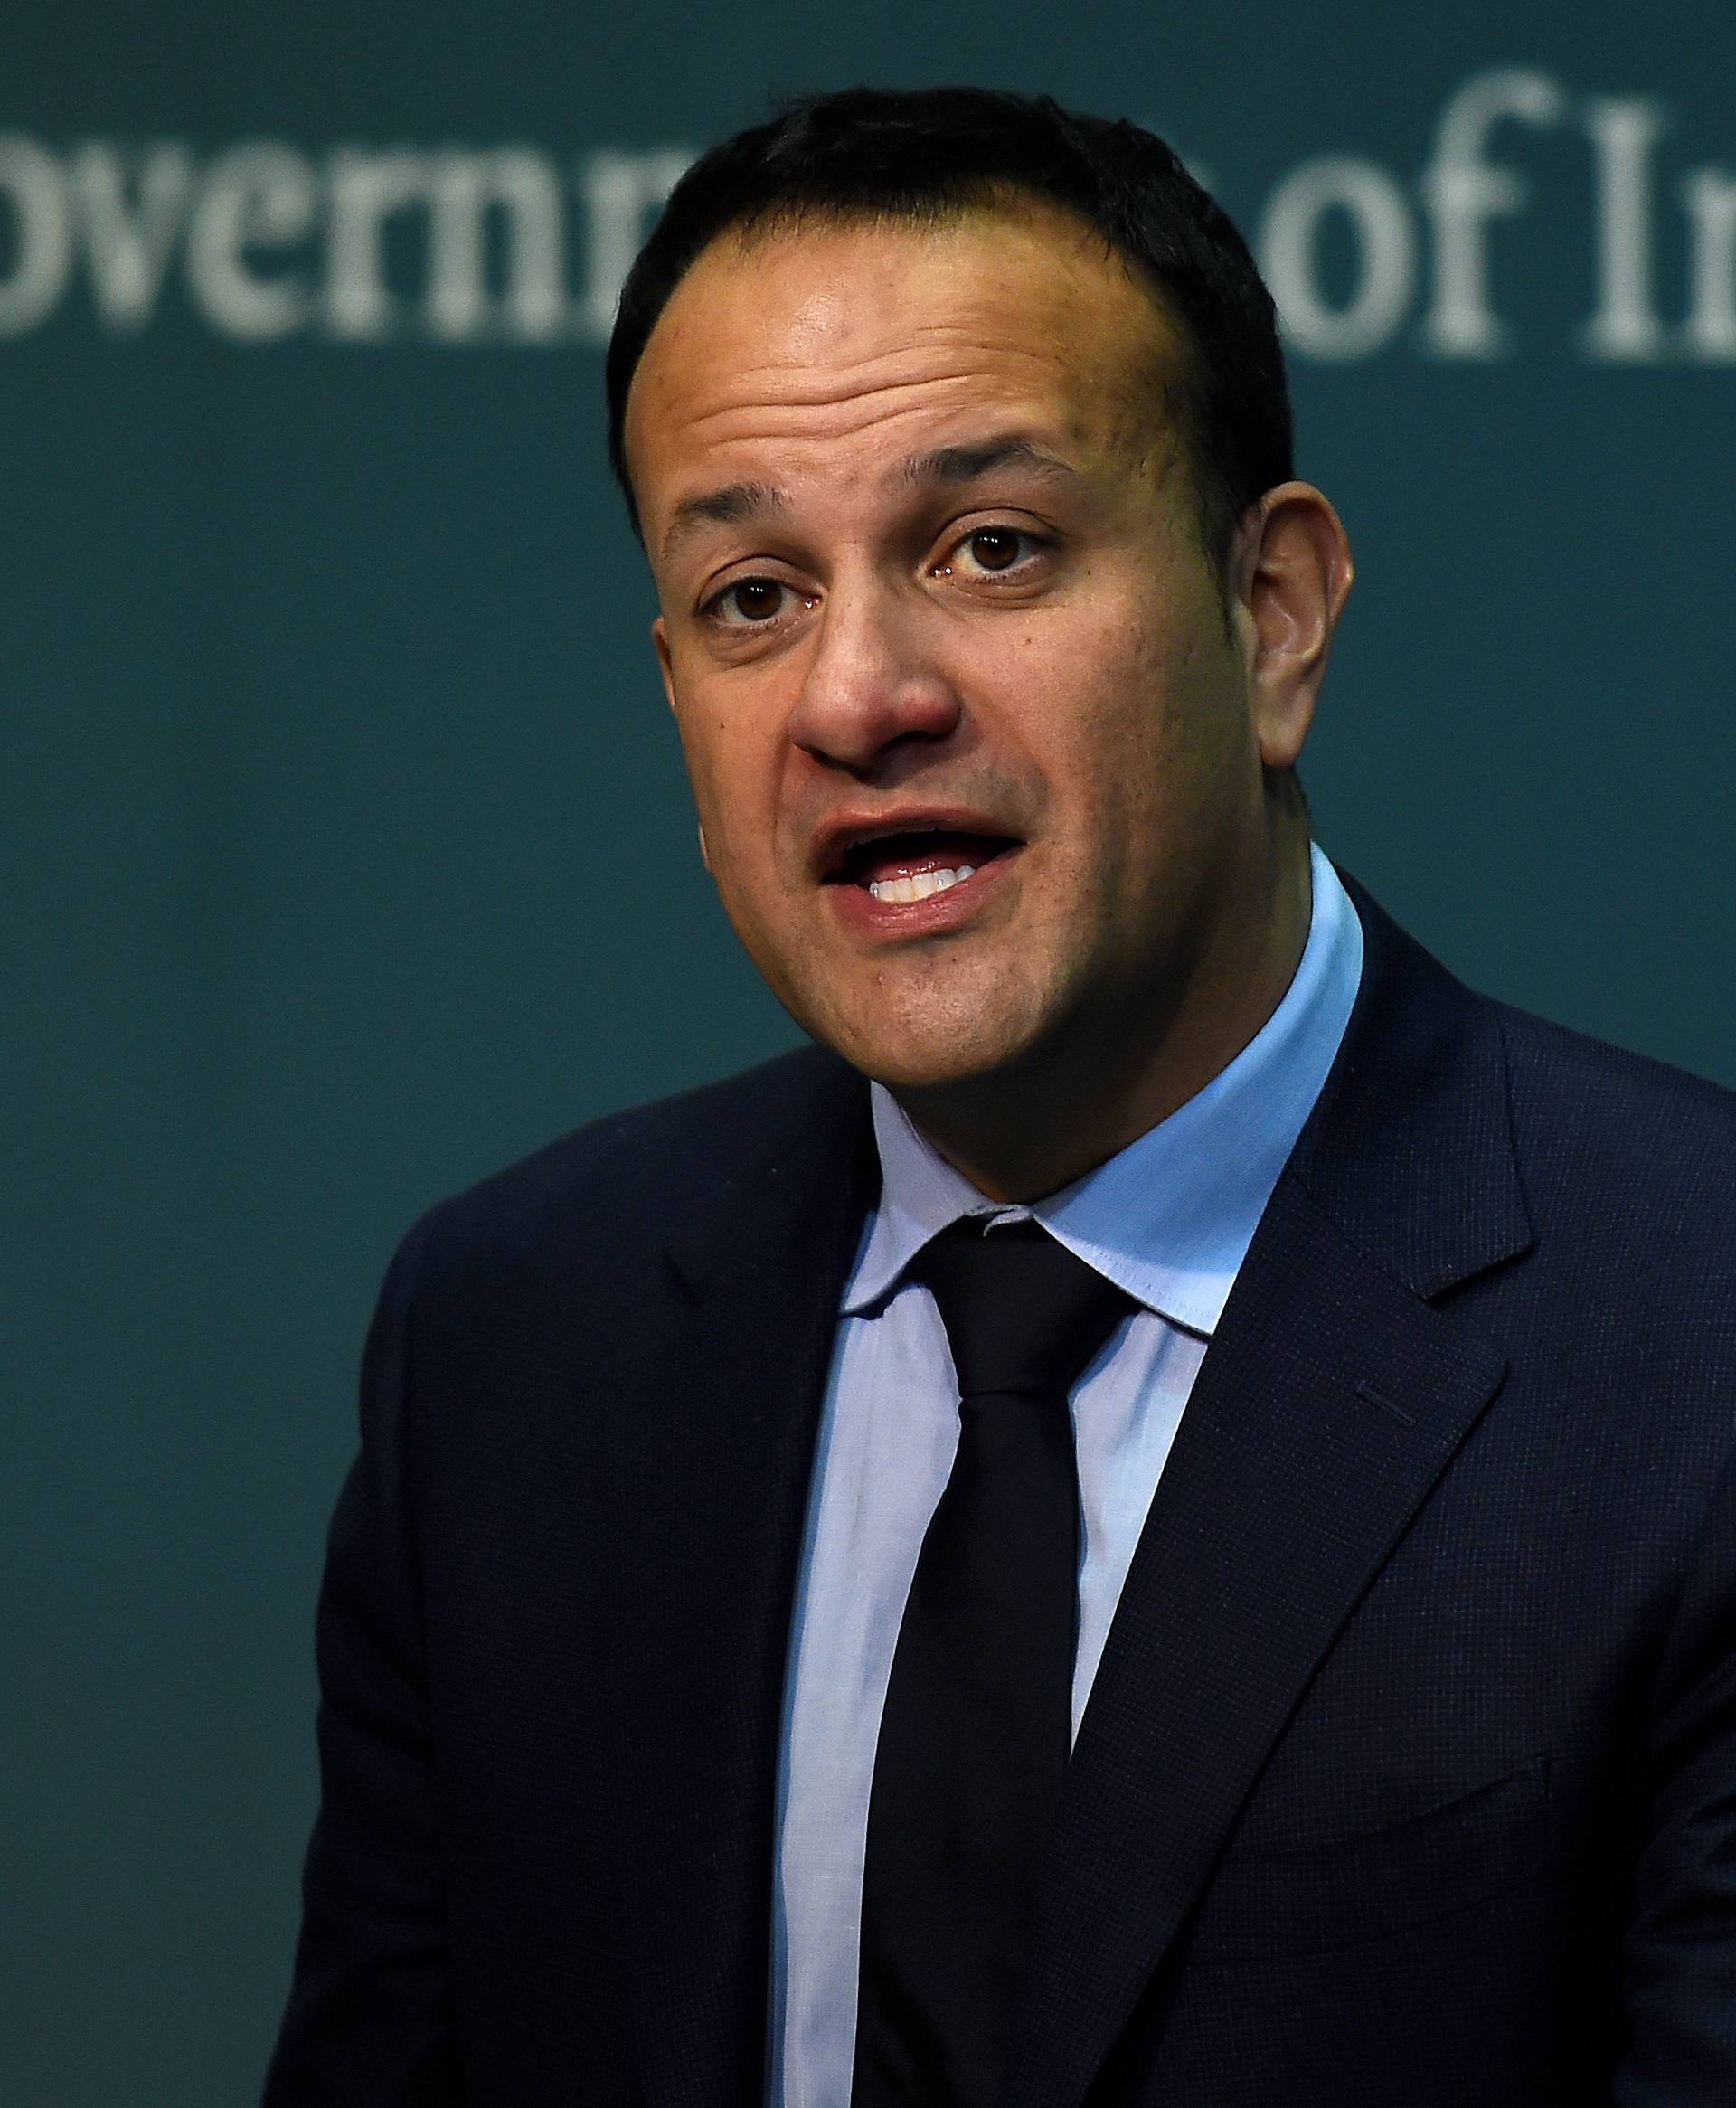 Taoiseach (Prime Minister) of Ireland Leo Varadkar speaks at a news conference announcing that the Irish Government will hold a referendum on liberalising abortion laws at the end of May, in Dublin